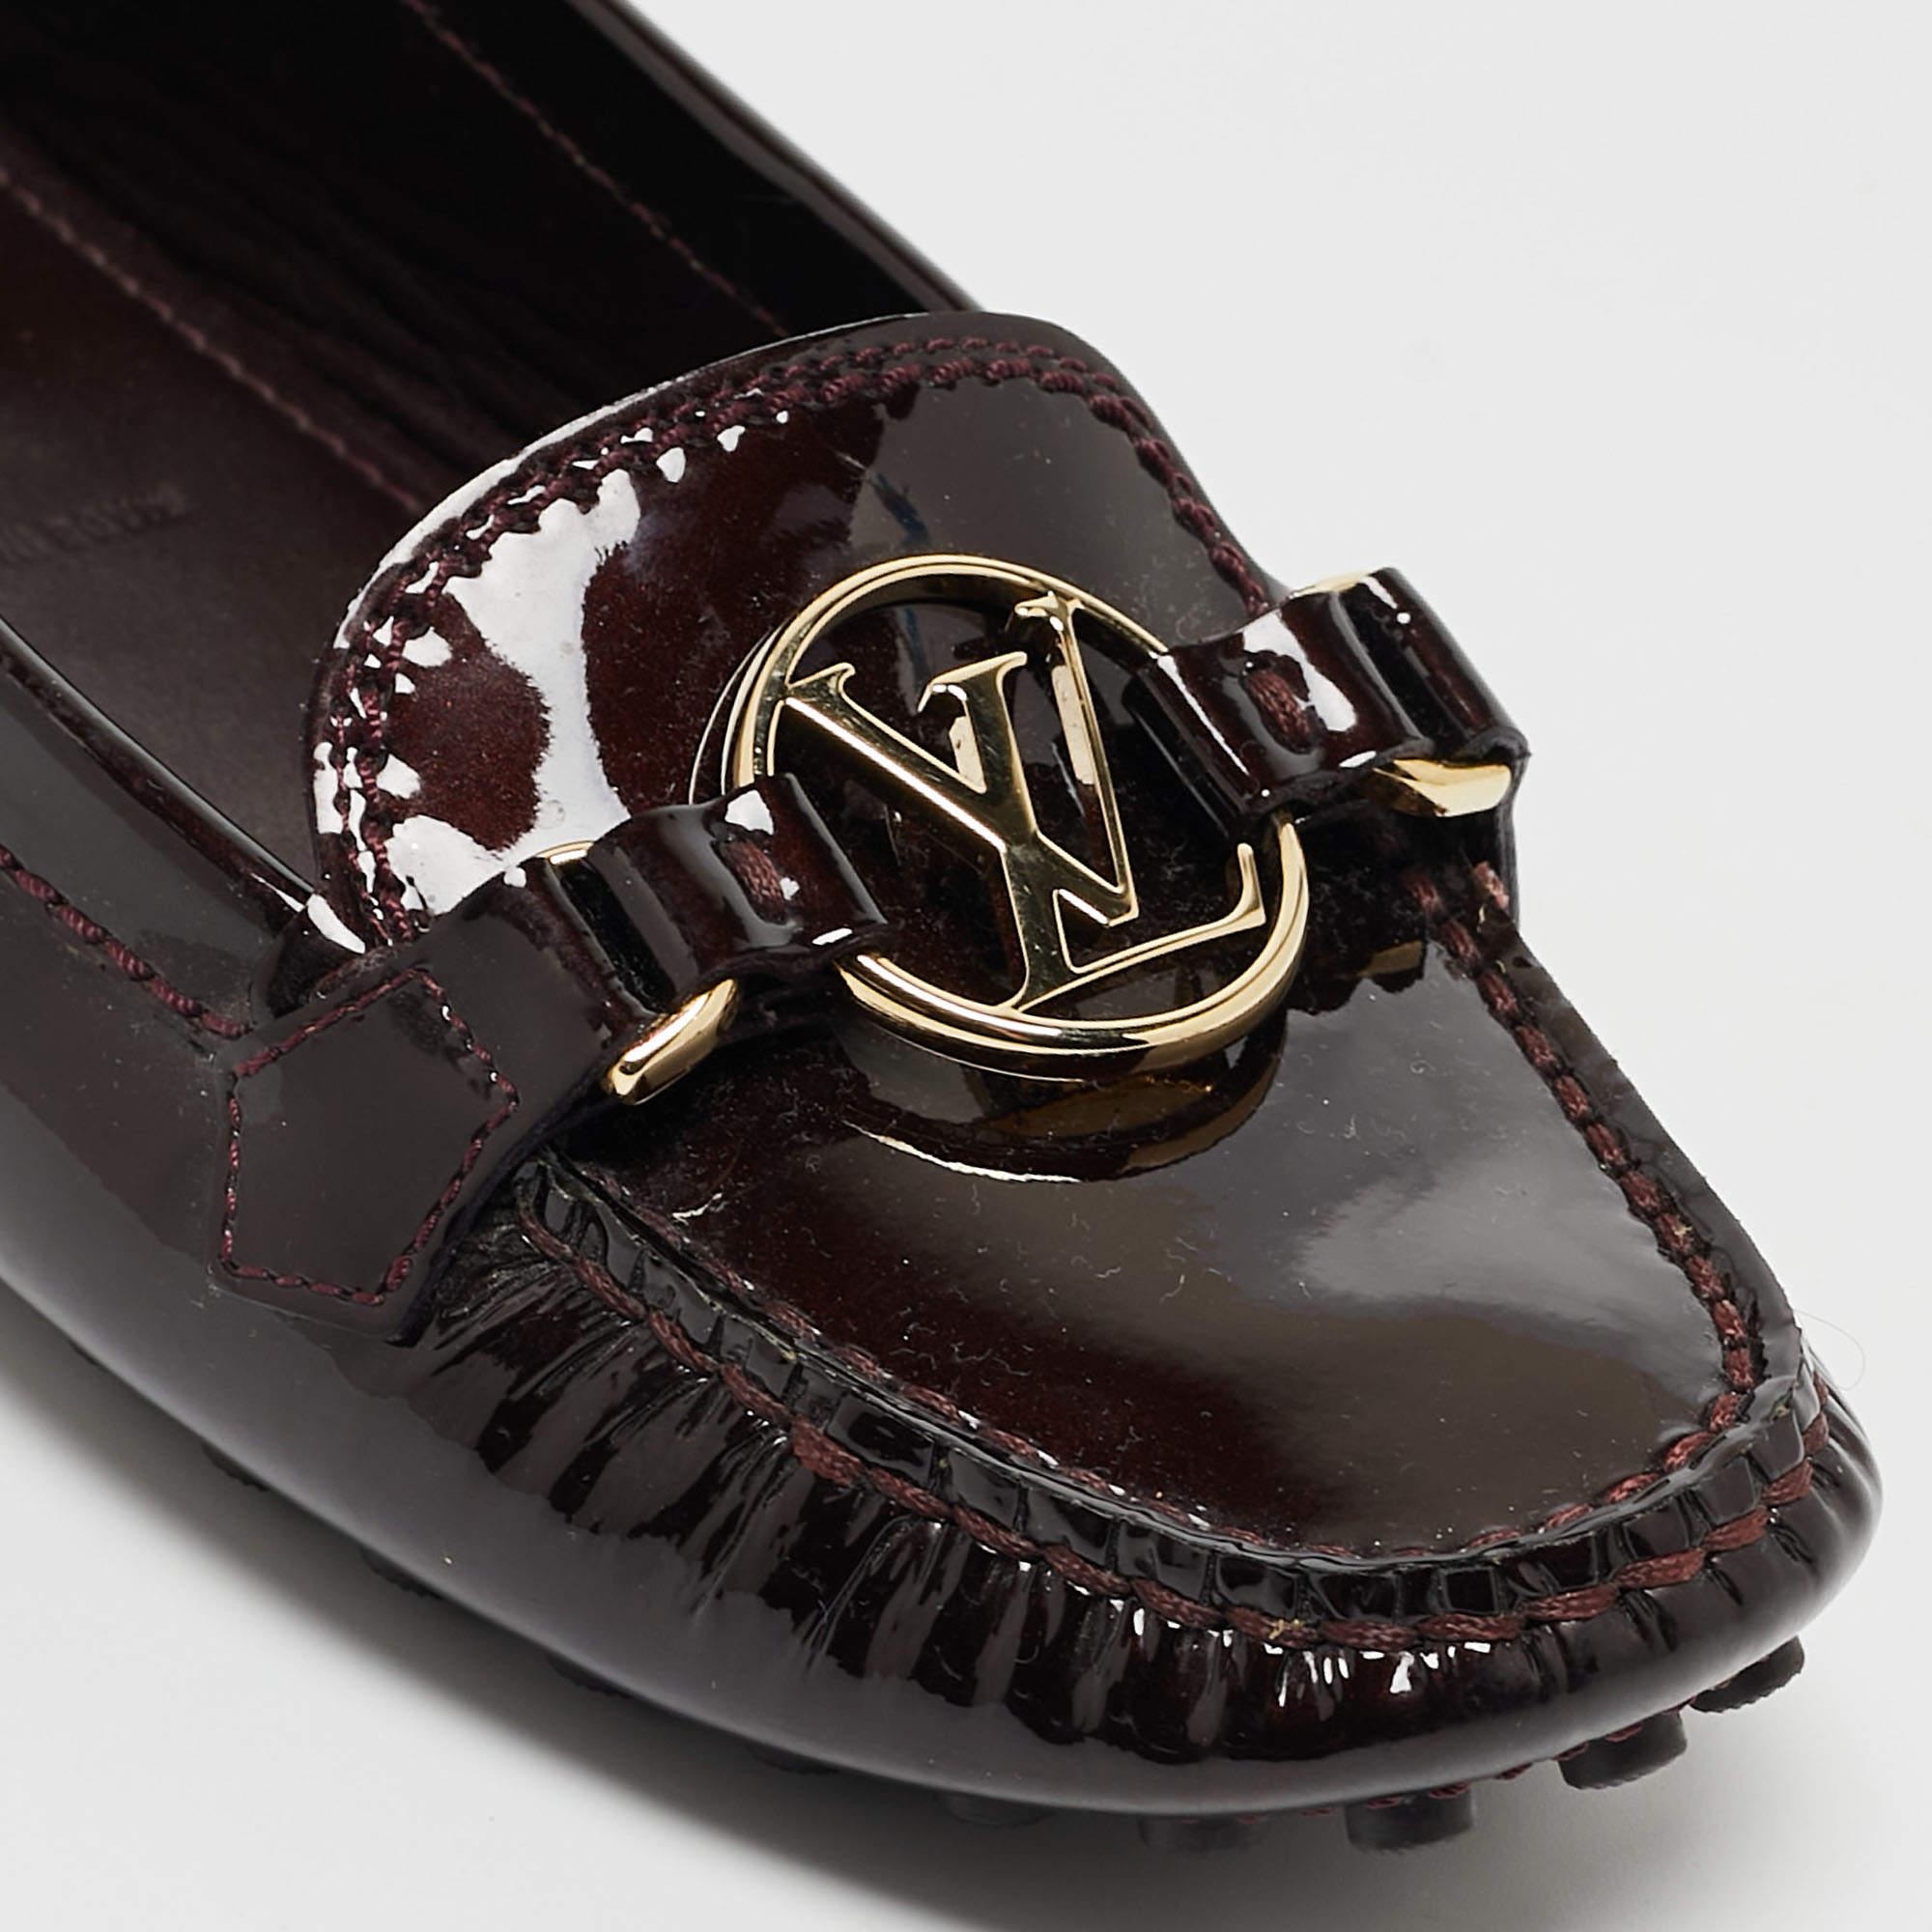 These Dauphine loafers from Louis Vuitton are simple, stylish, and durable! They have a patent leather exterior and the signature LV perched on the uppers in shiny gold-tone metal. The flats are complete with brand-labeled leather insoles and rubber